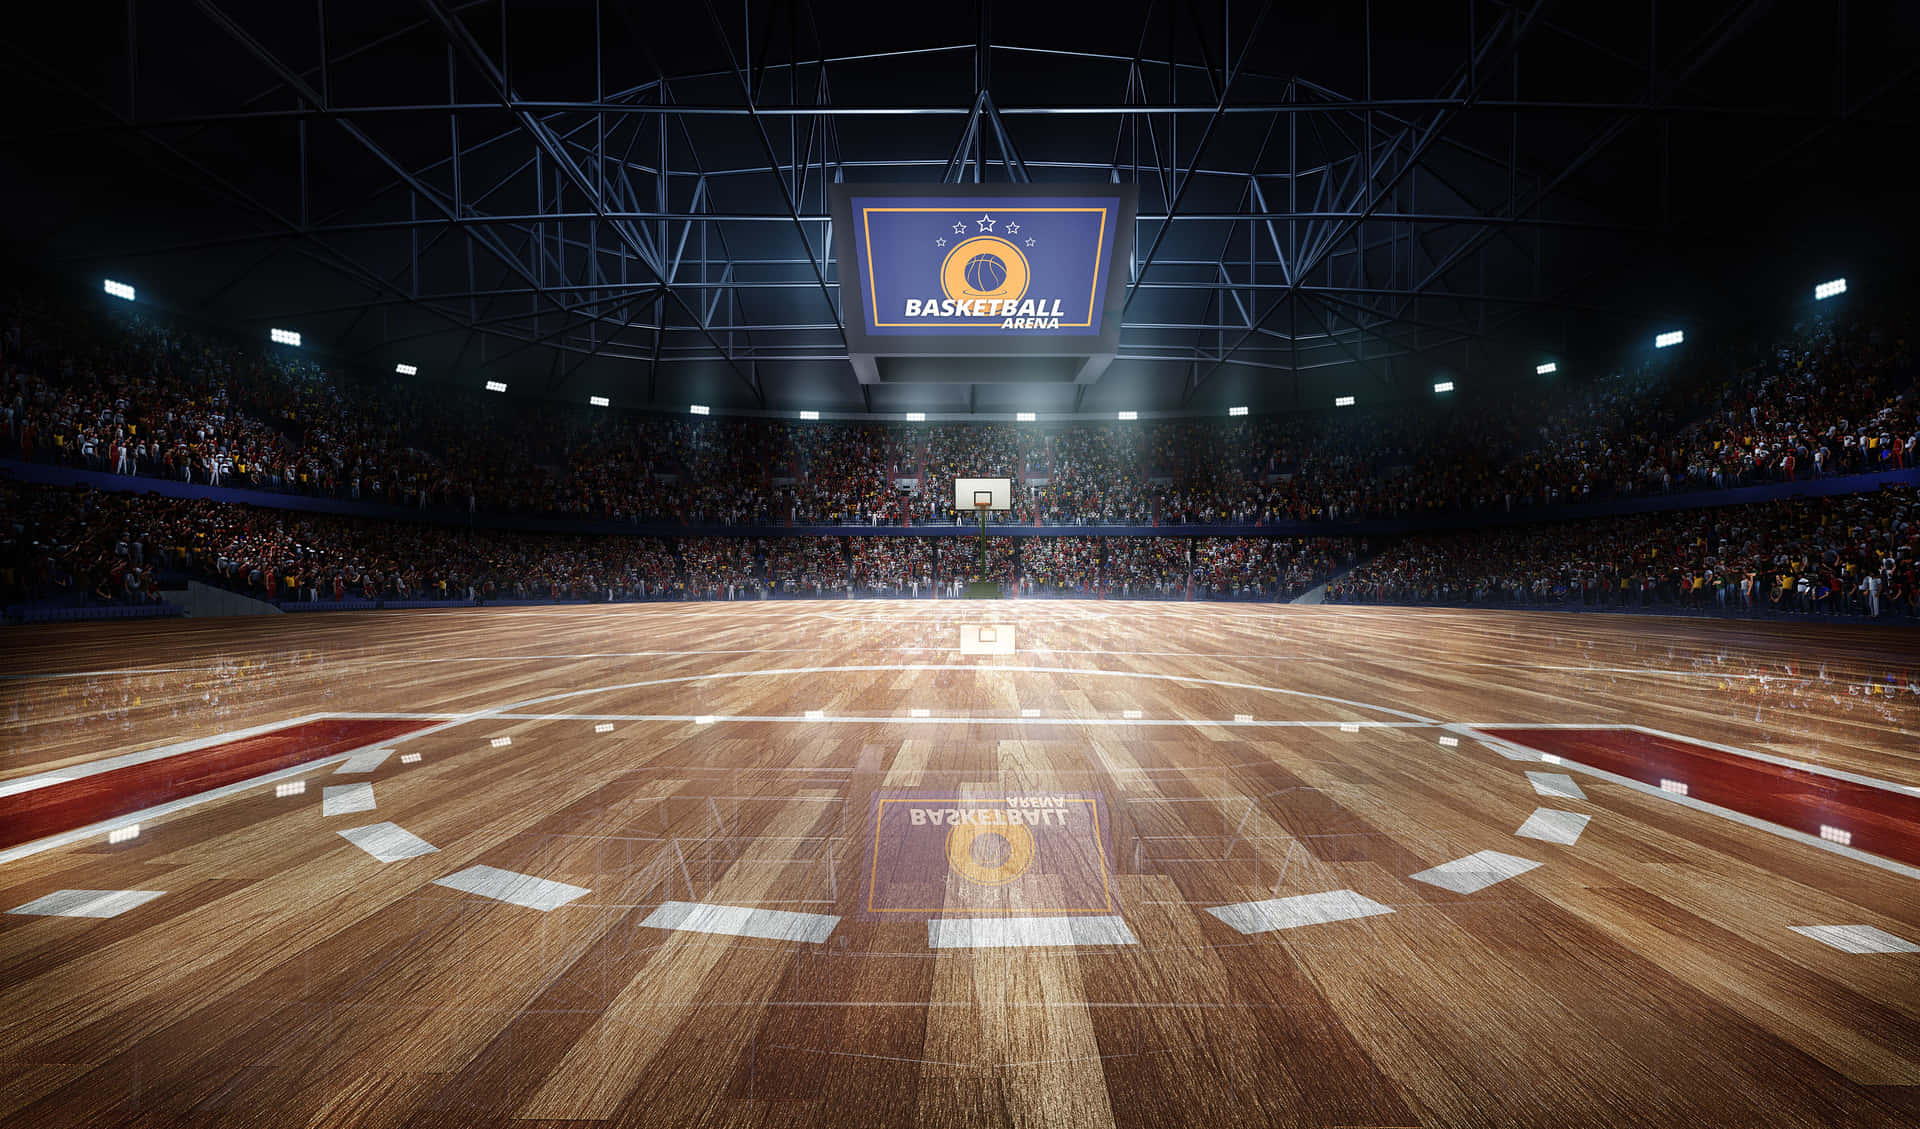 Download An Empty Basketball Court With Lights On | Wallpapers.com